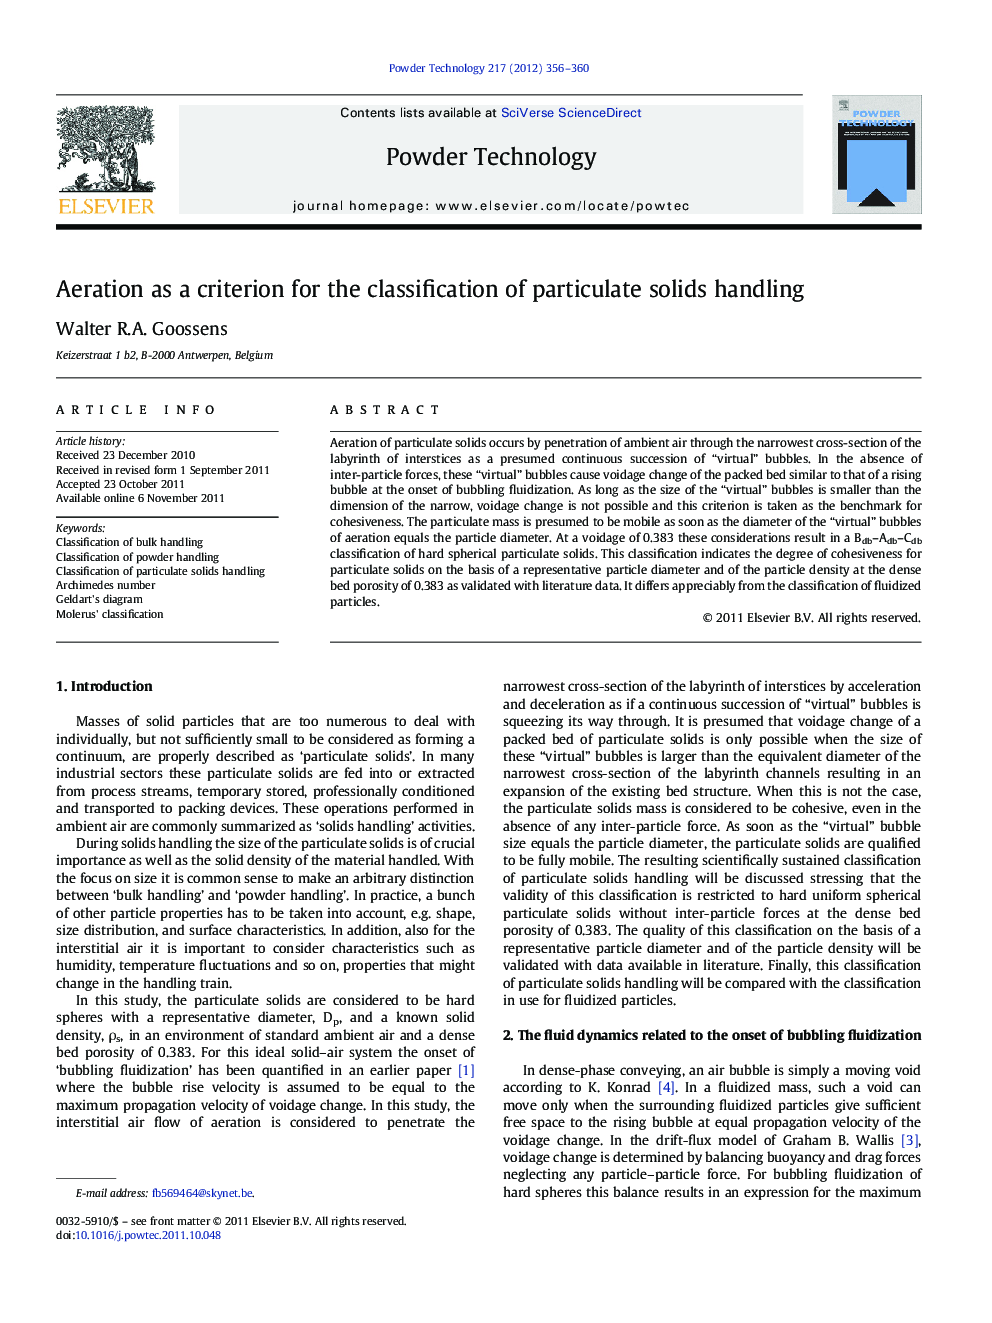 Aeration as a criterion for the classification of particulate solids handling